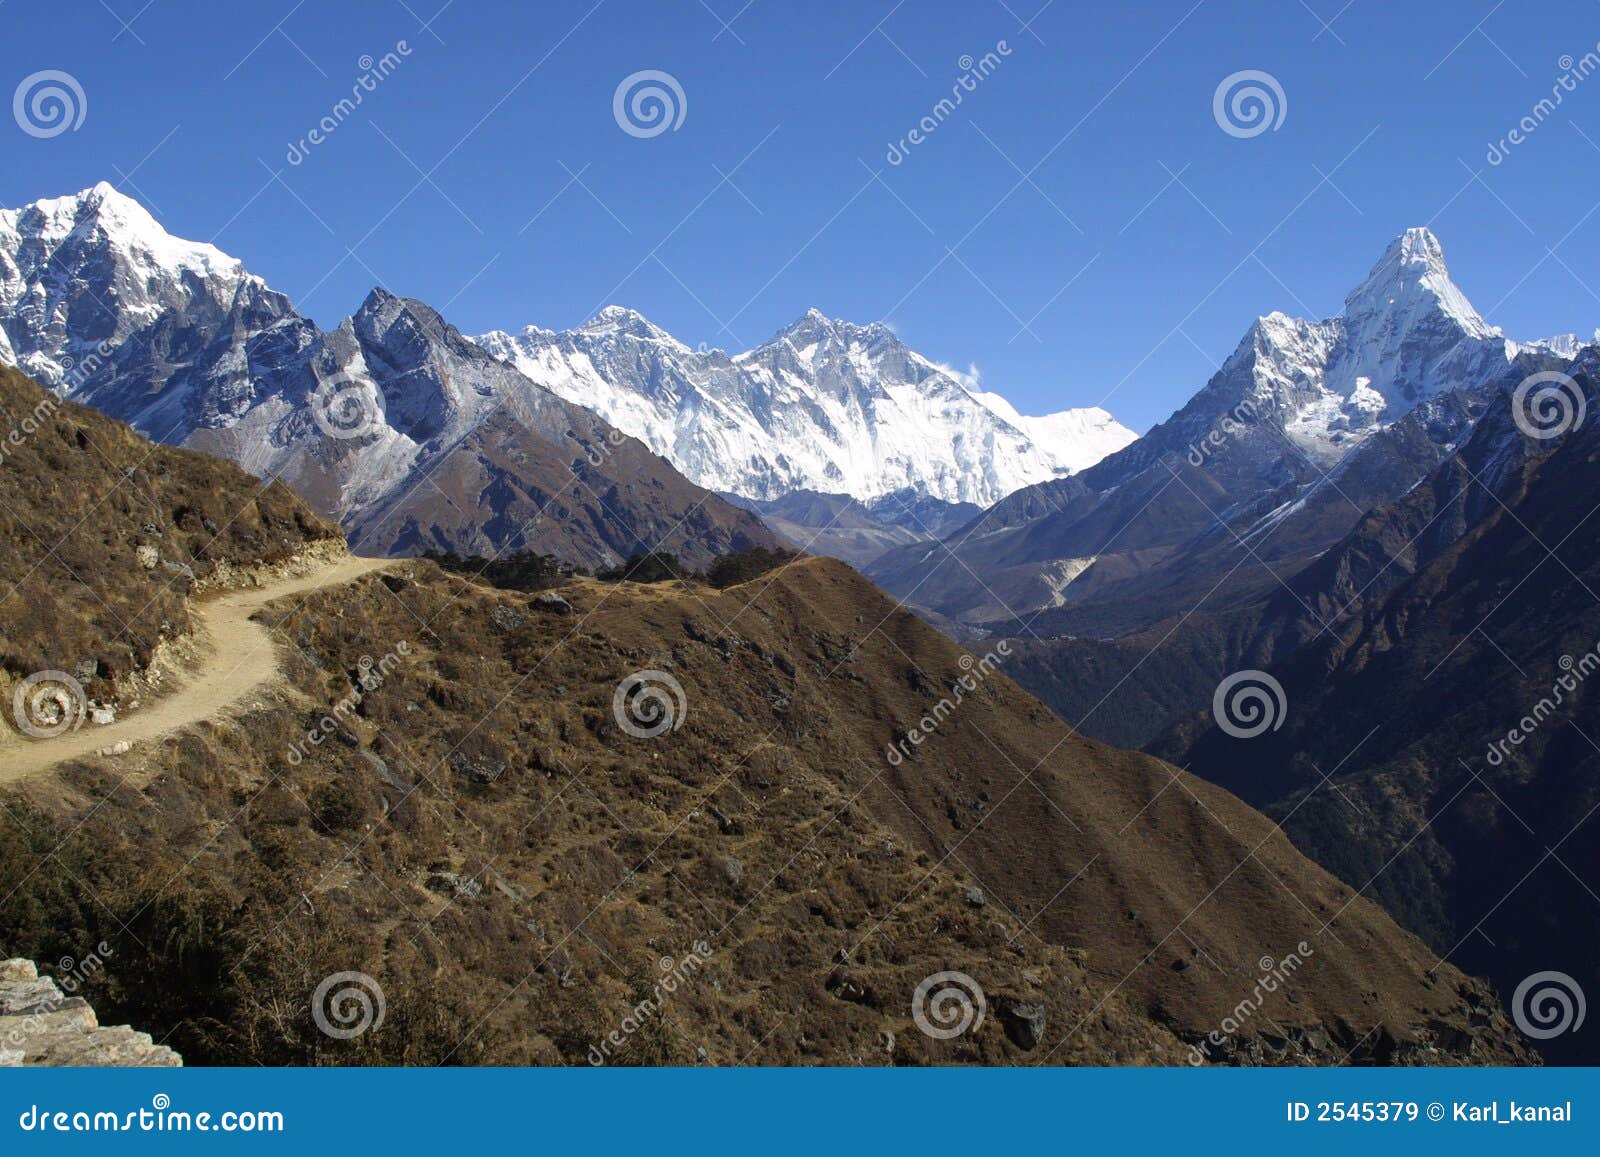 everest, lothse and ama dablam